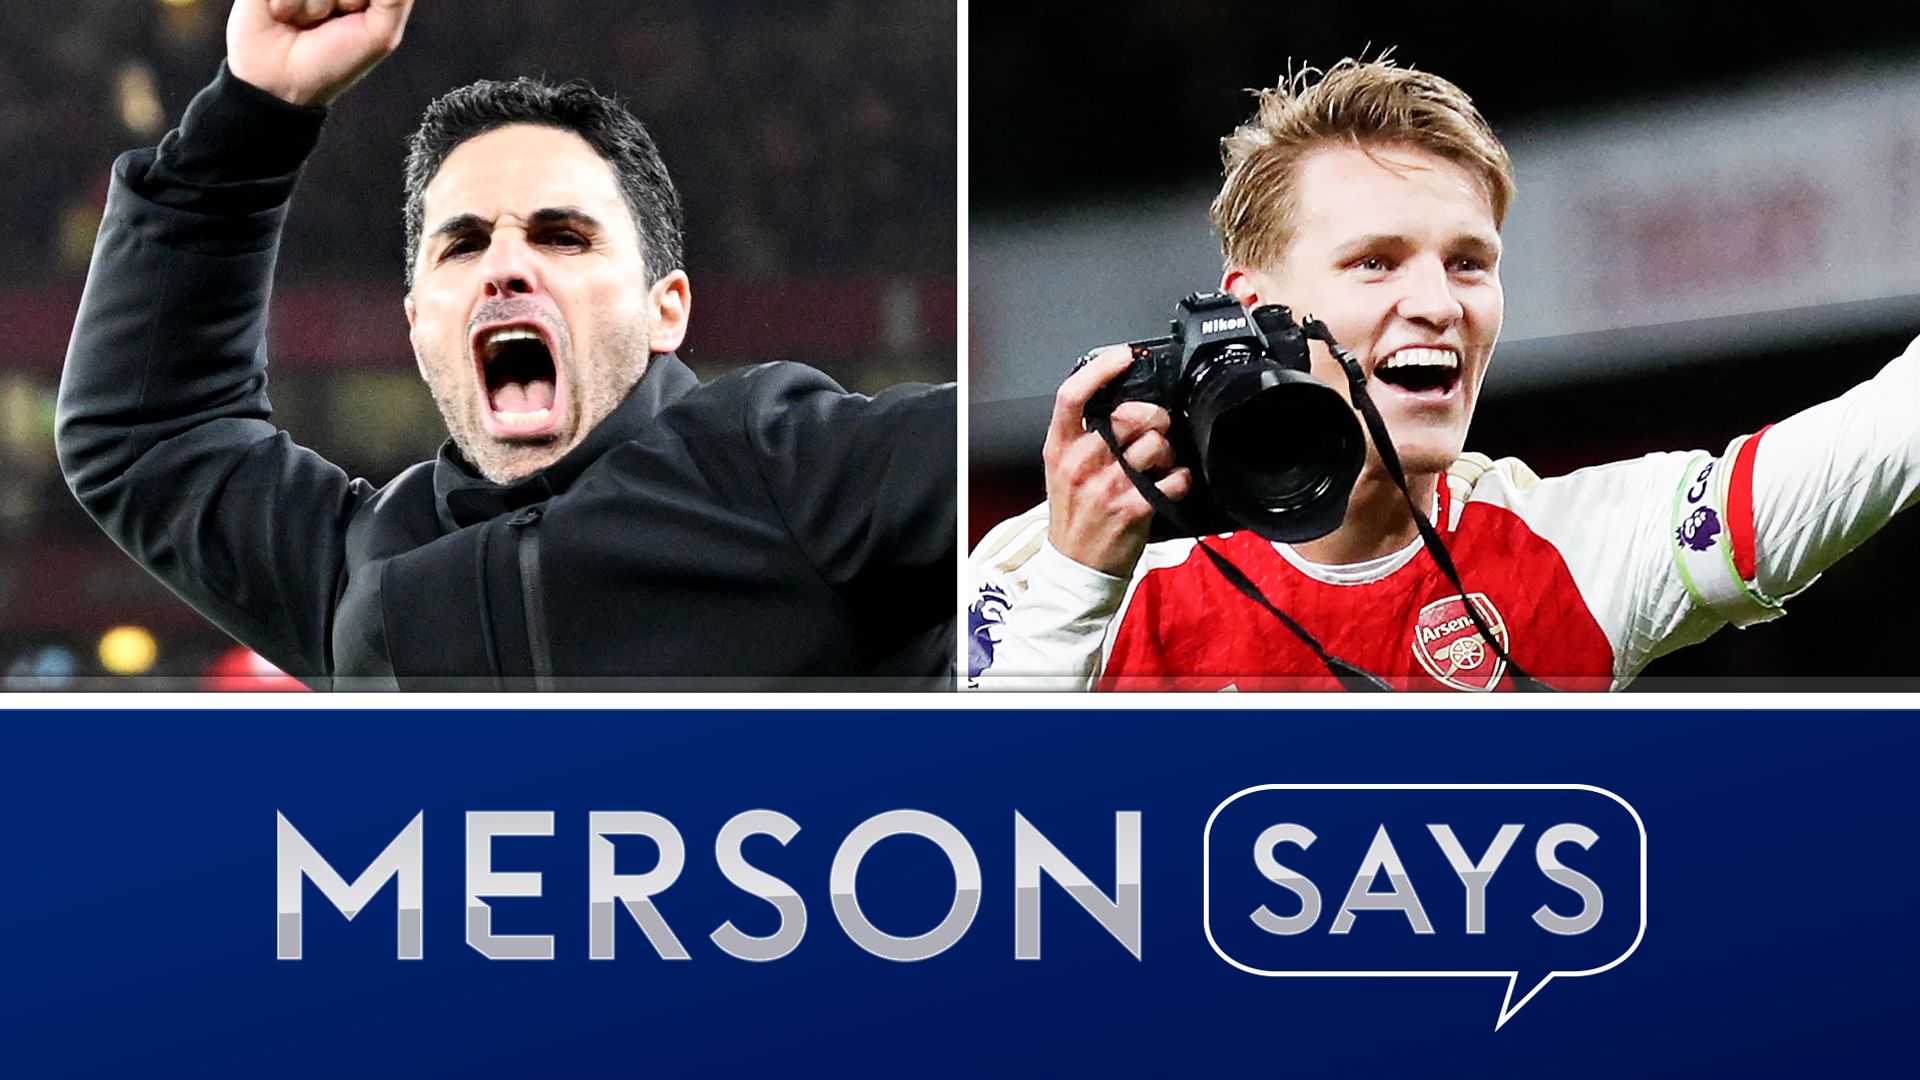 Merson Says: Arsenal won their cup final so why not celebrate?